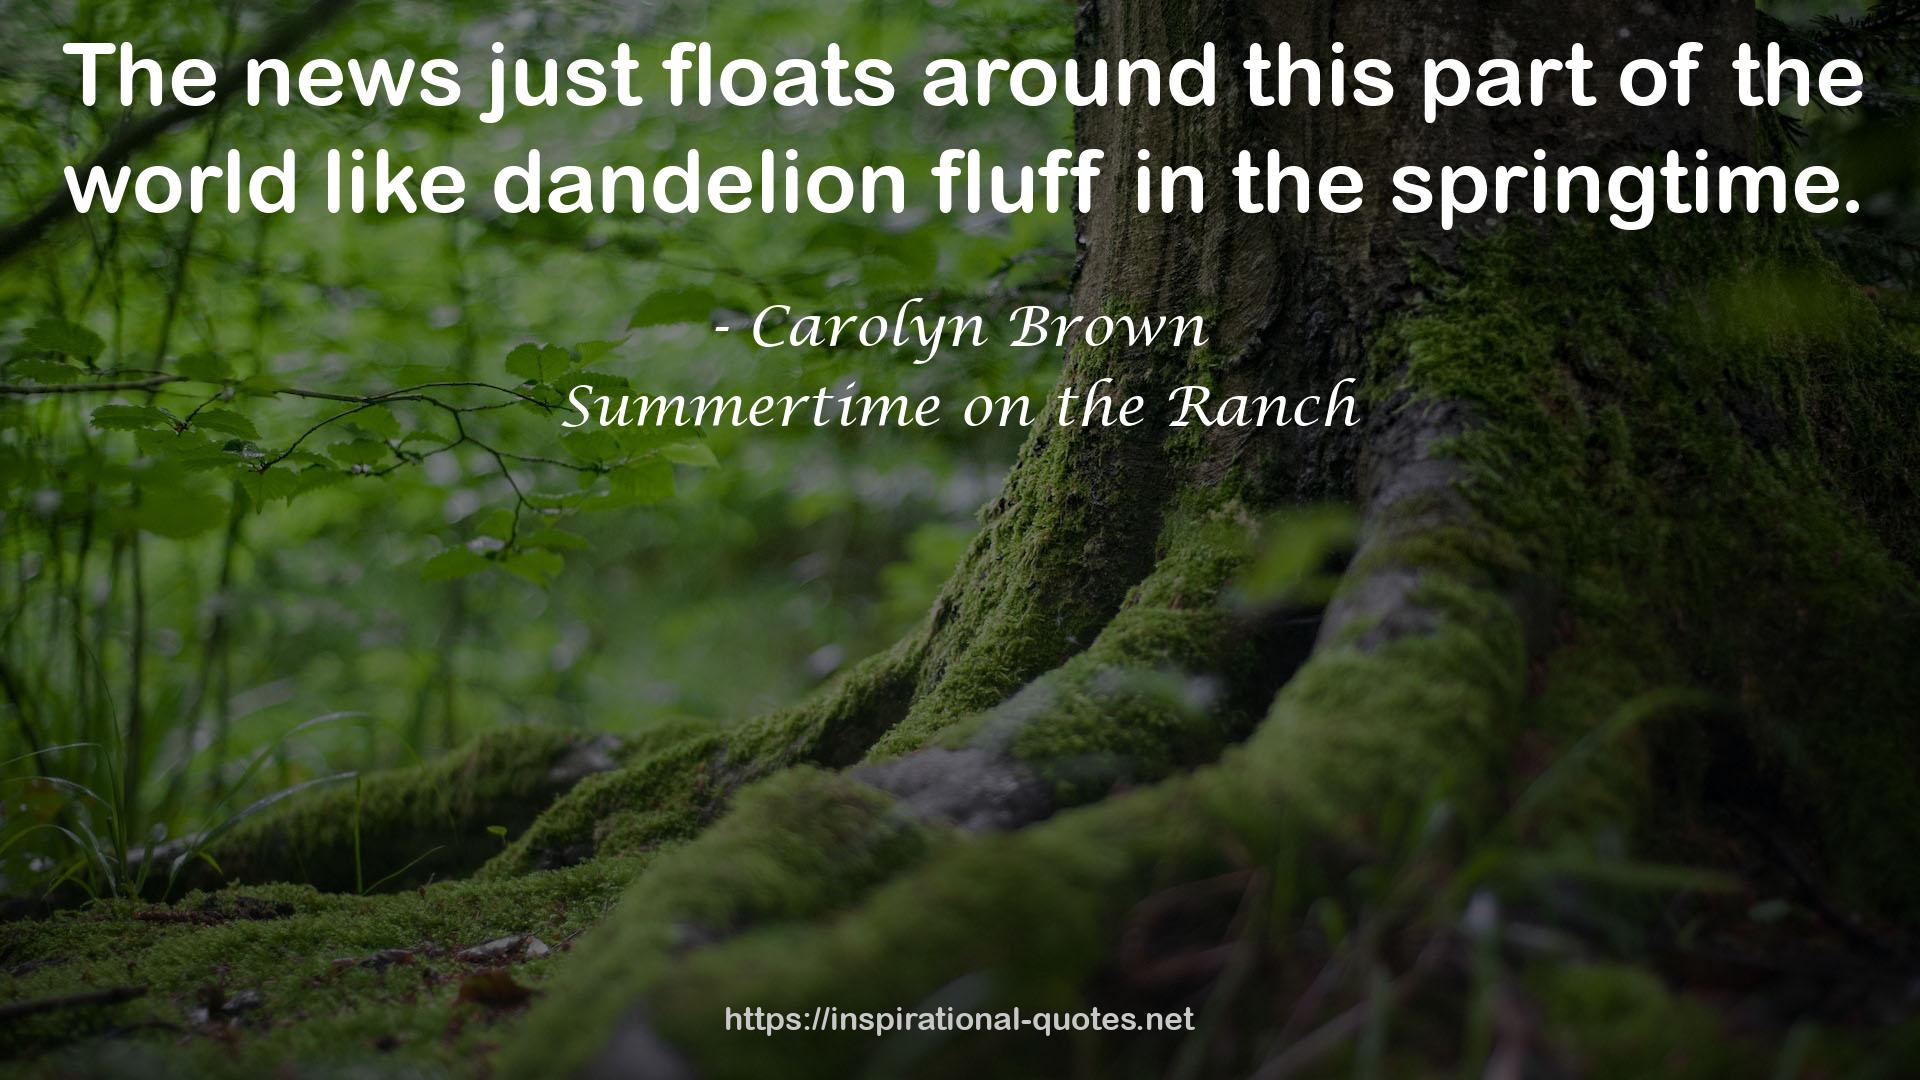 Summertime on the Ranch QUOTES